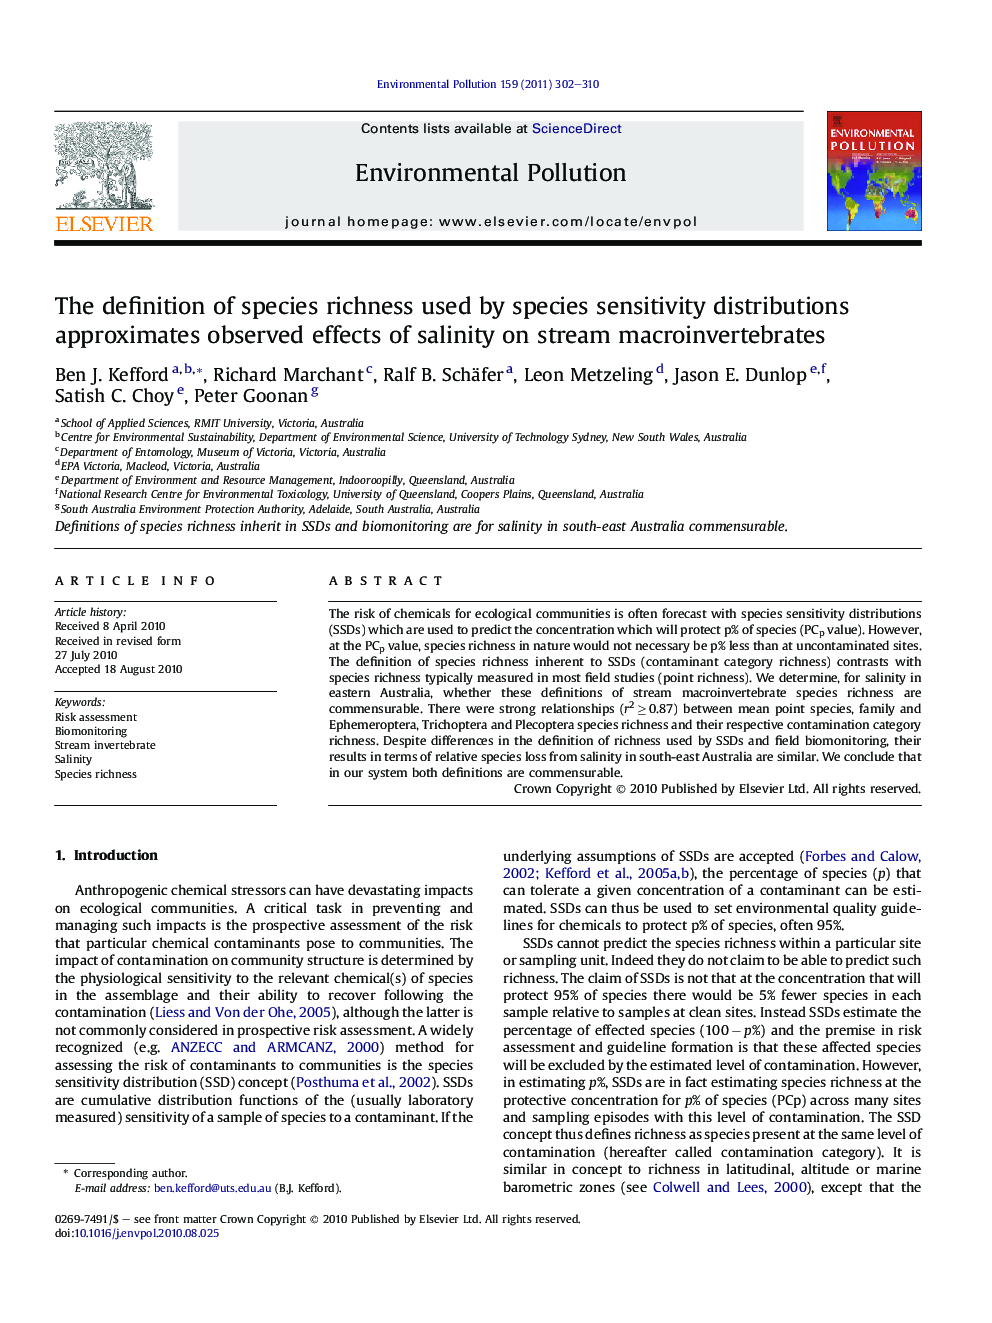 The definition of species richness used by species sensitivity distributions approximates observed effects of salinity on stream macroinvertebrates